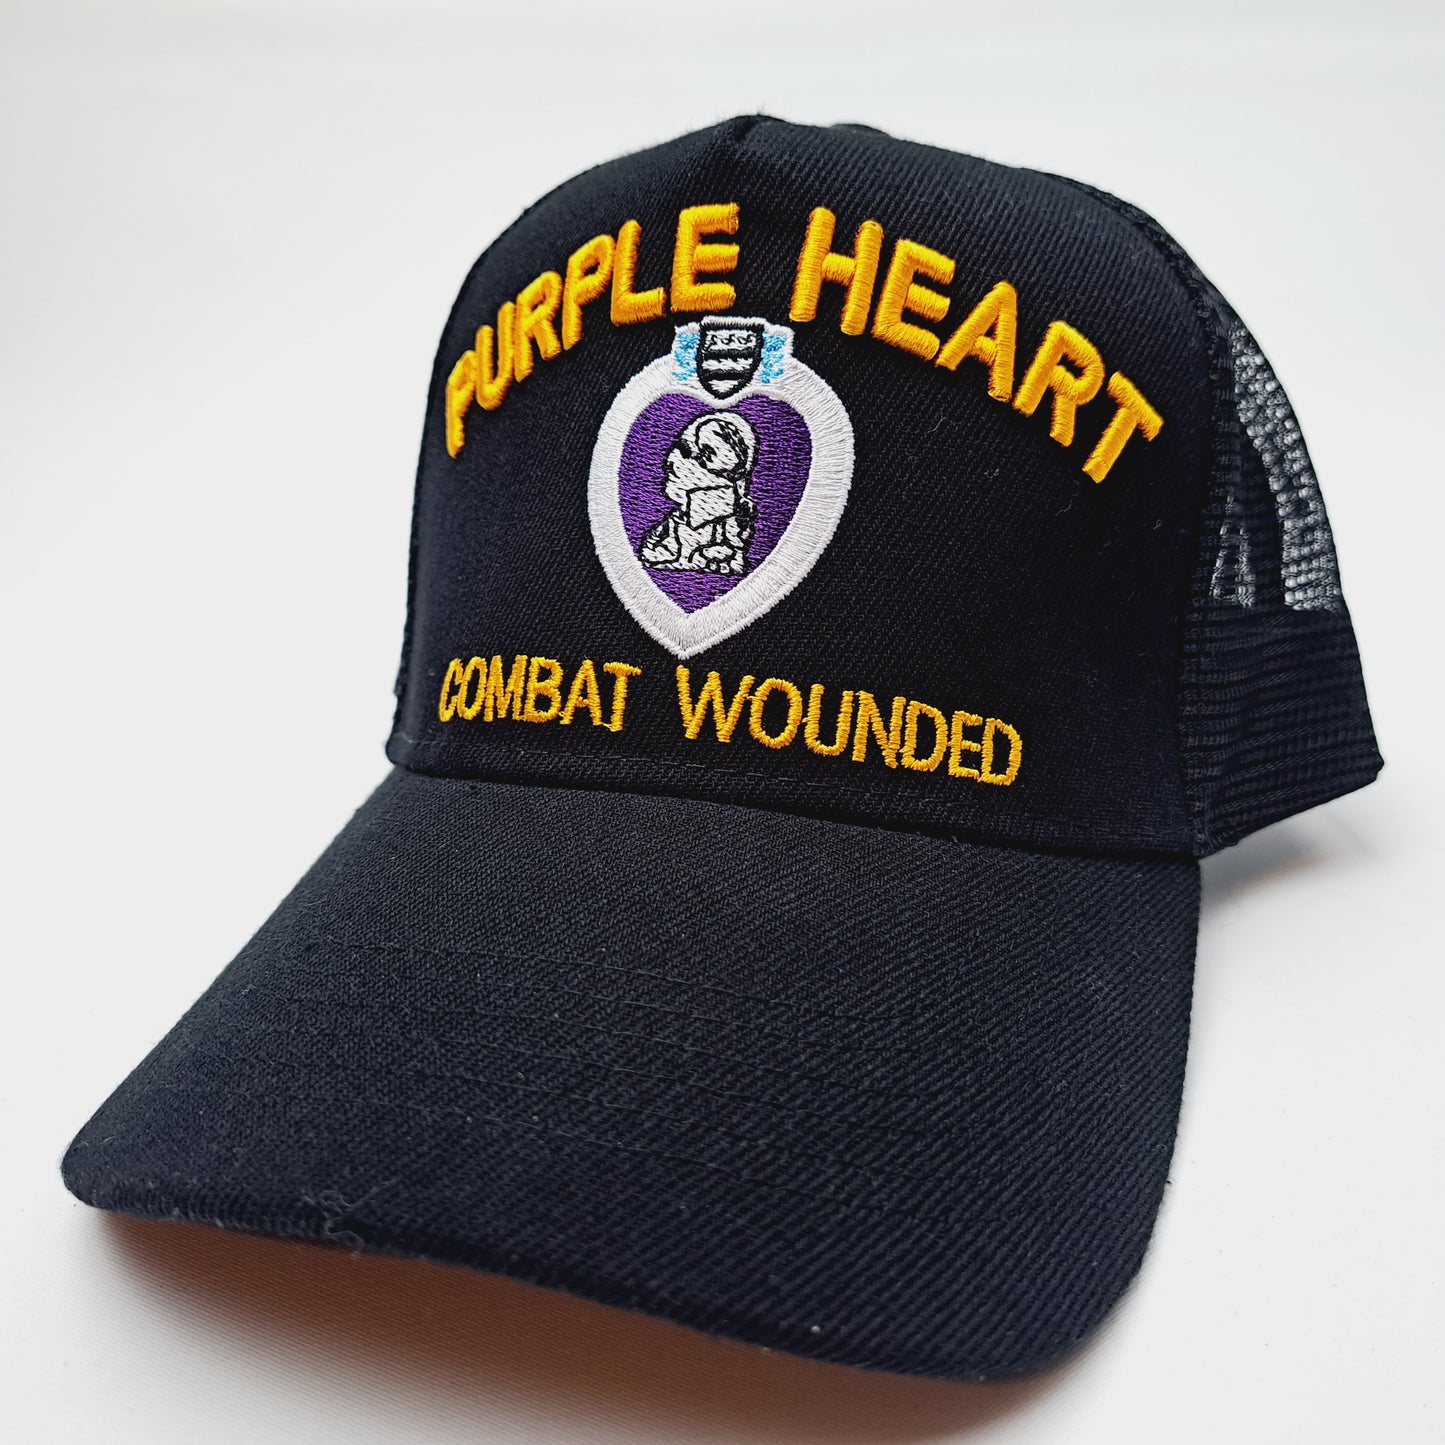 Purple Heart Combat Wounded Men's Cap Ball Hat Black Embroidered Acrylic